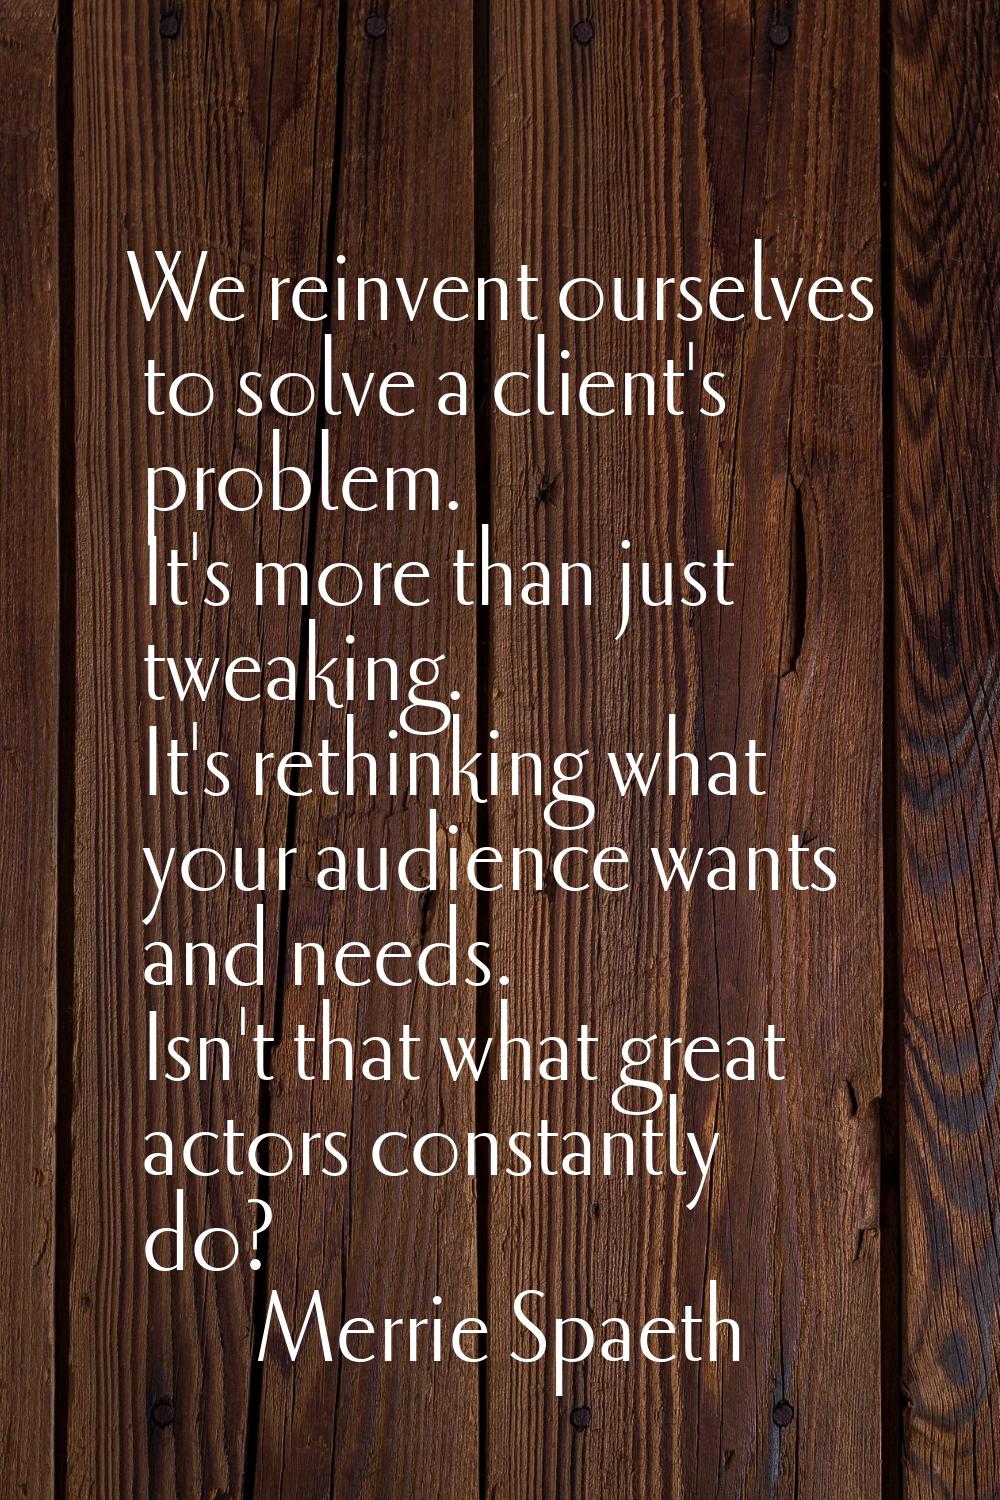 We reinvent ourselves to solve a client's problem. It's more than just tweaking. It's rethinking wh